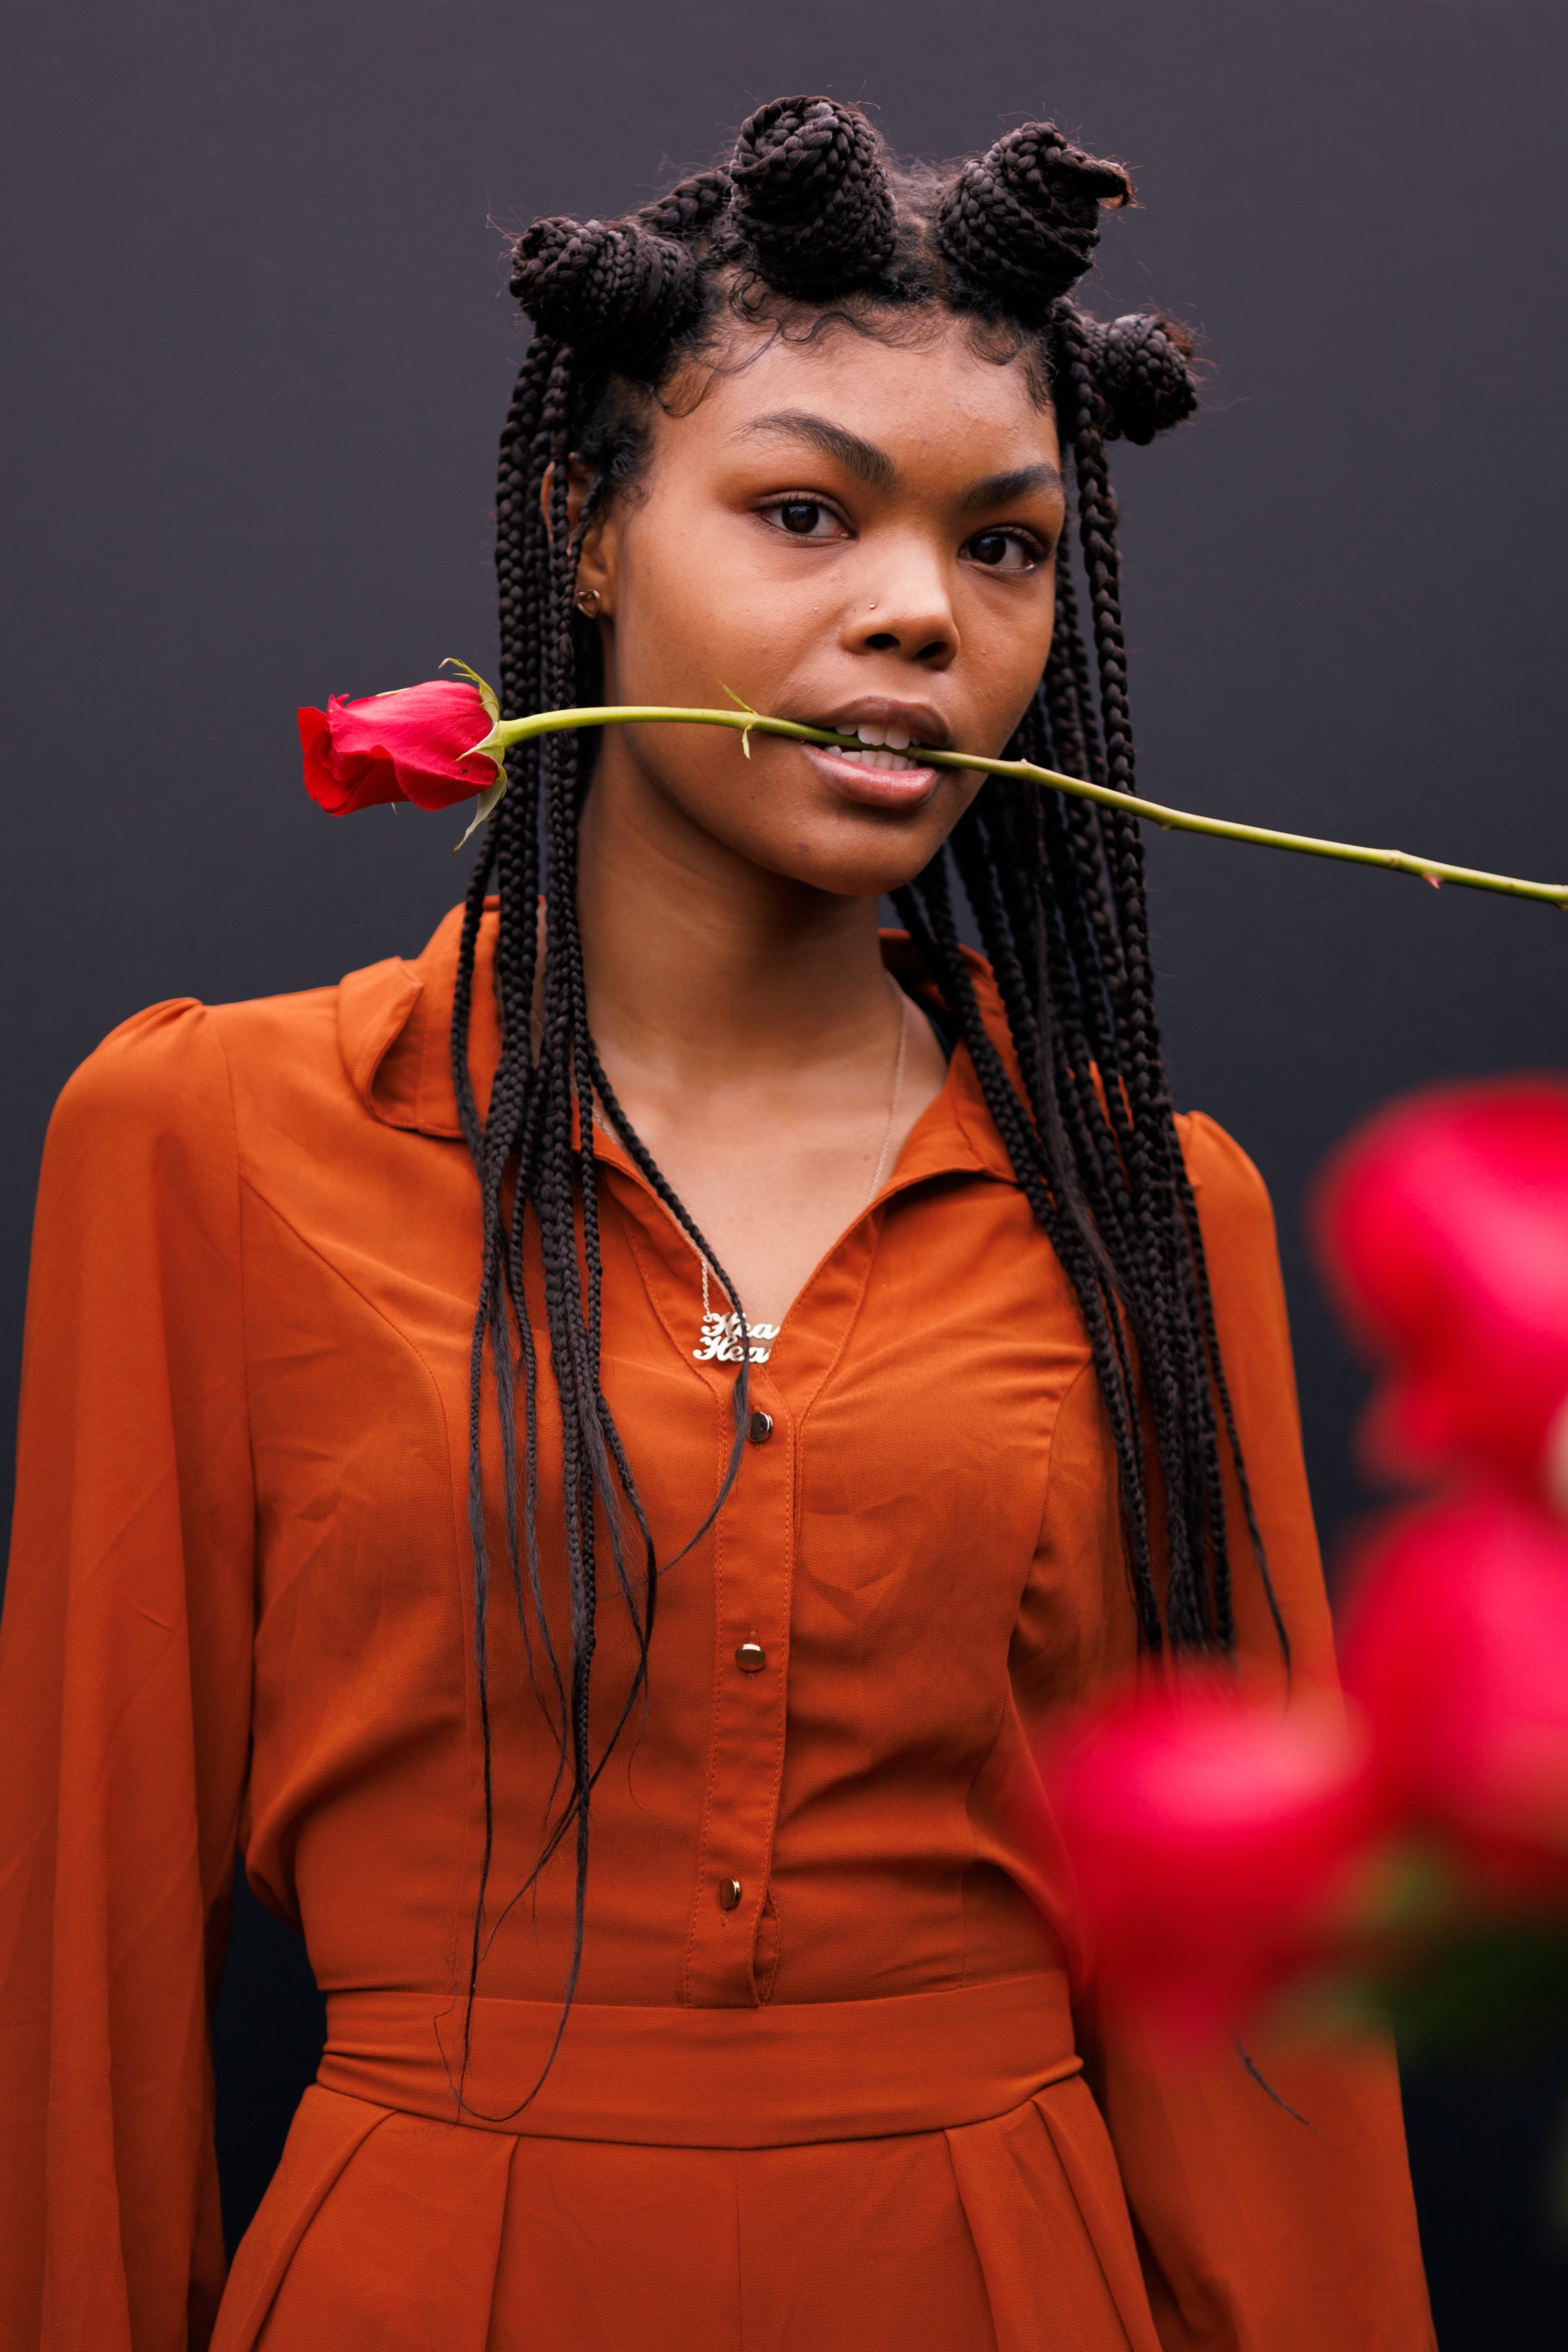 A woma with a rose in between her teeth. | Source: Pexels